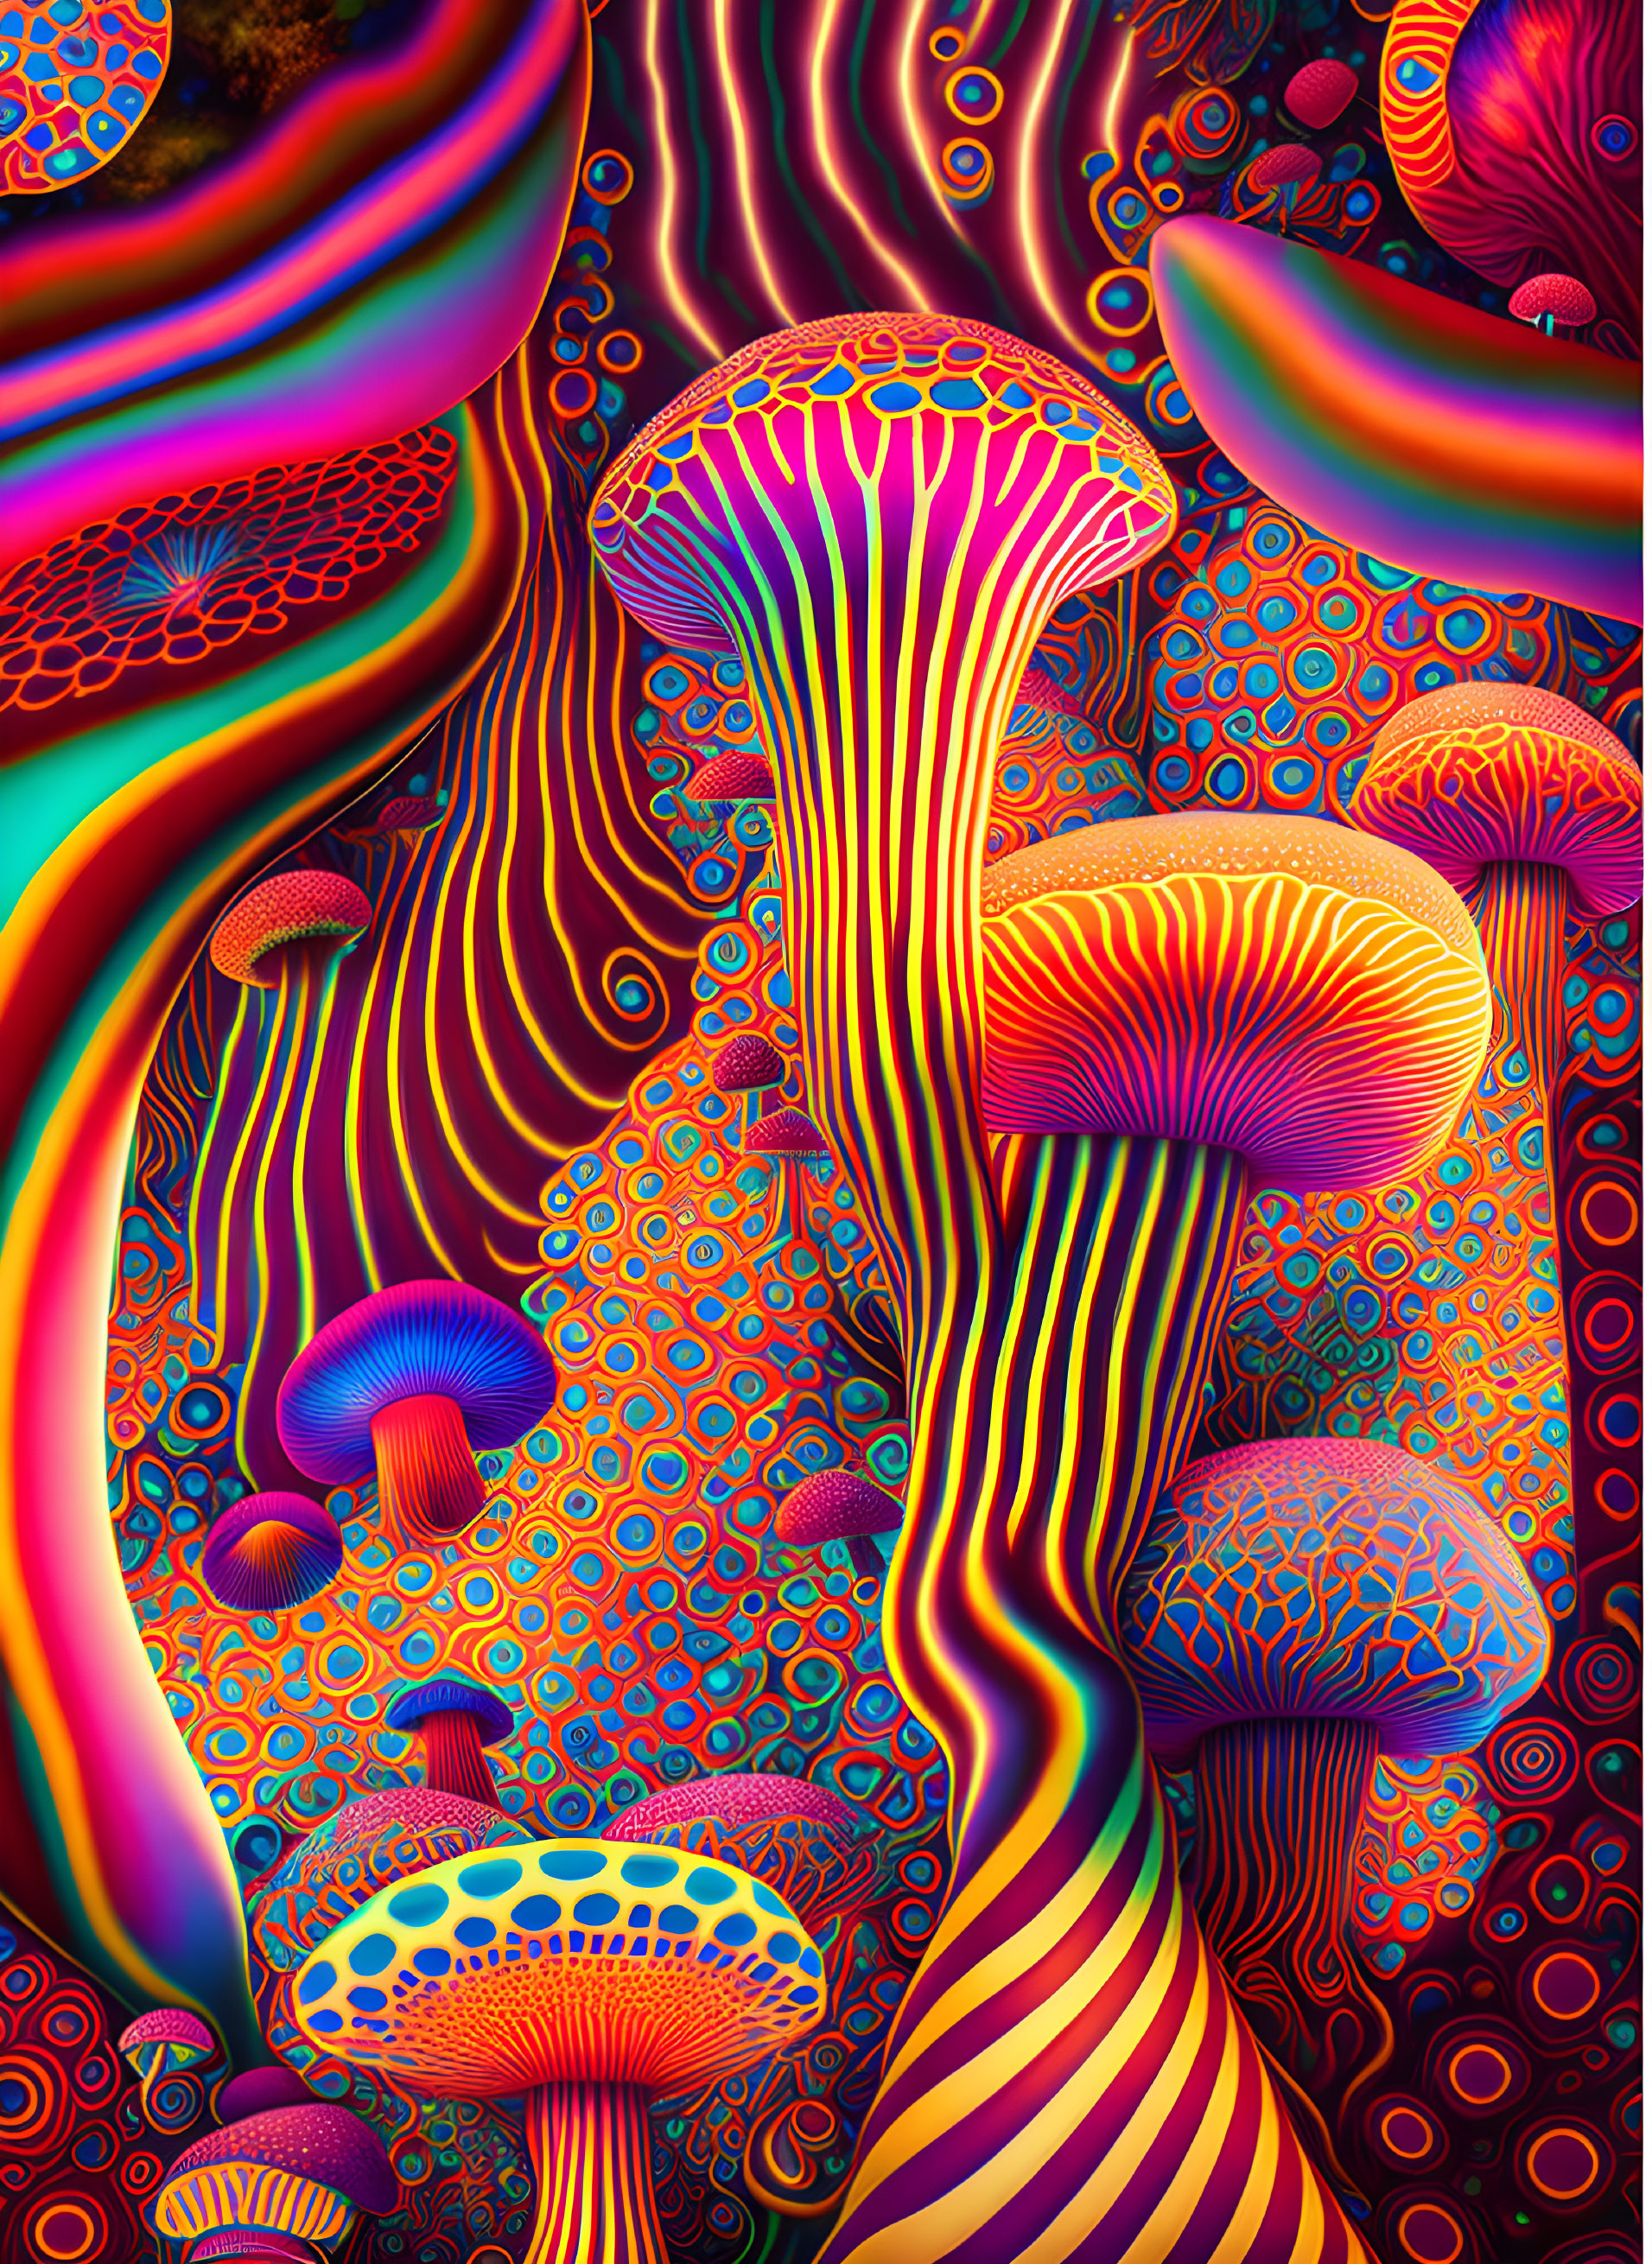 Awesome Psychedelic Mushroom Field